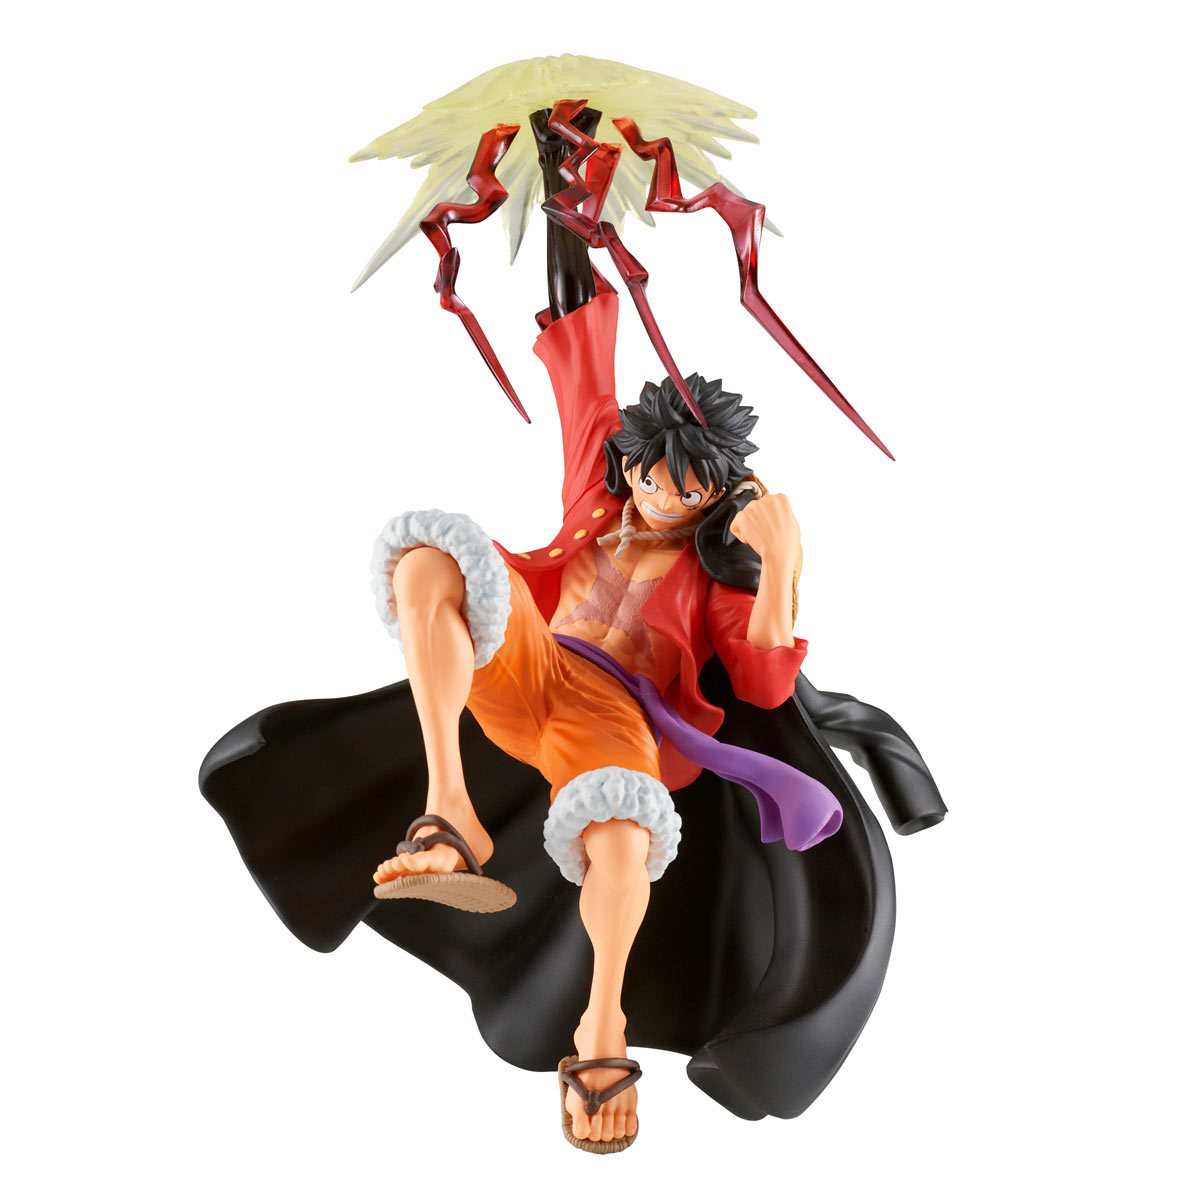 One Piece Battle Record Collection Monkey D. Luffy (Gear 5)